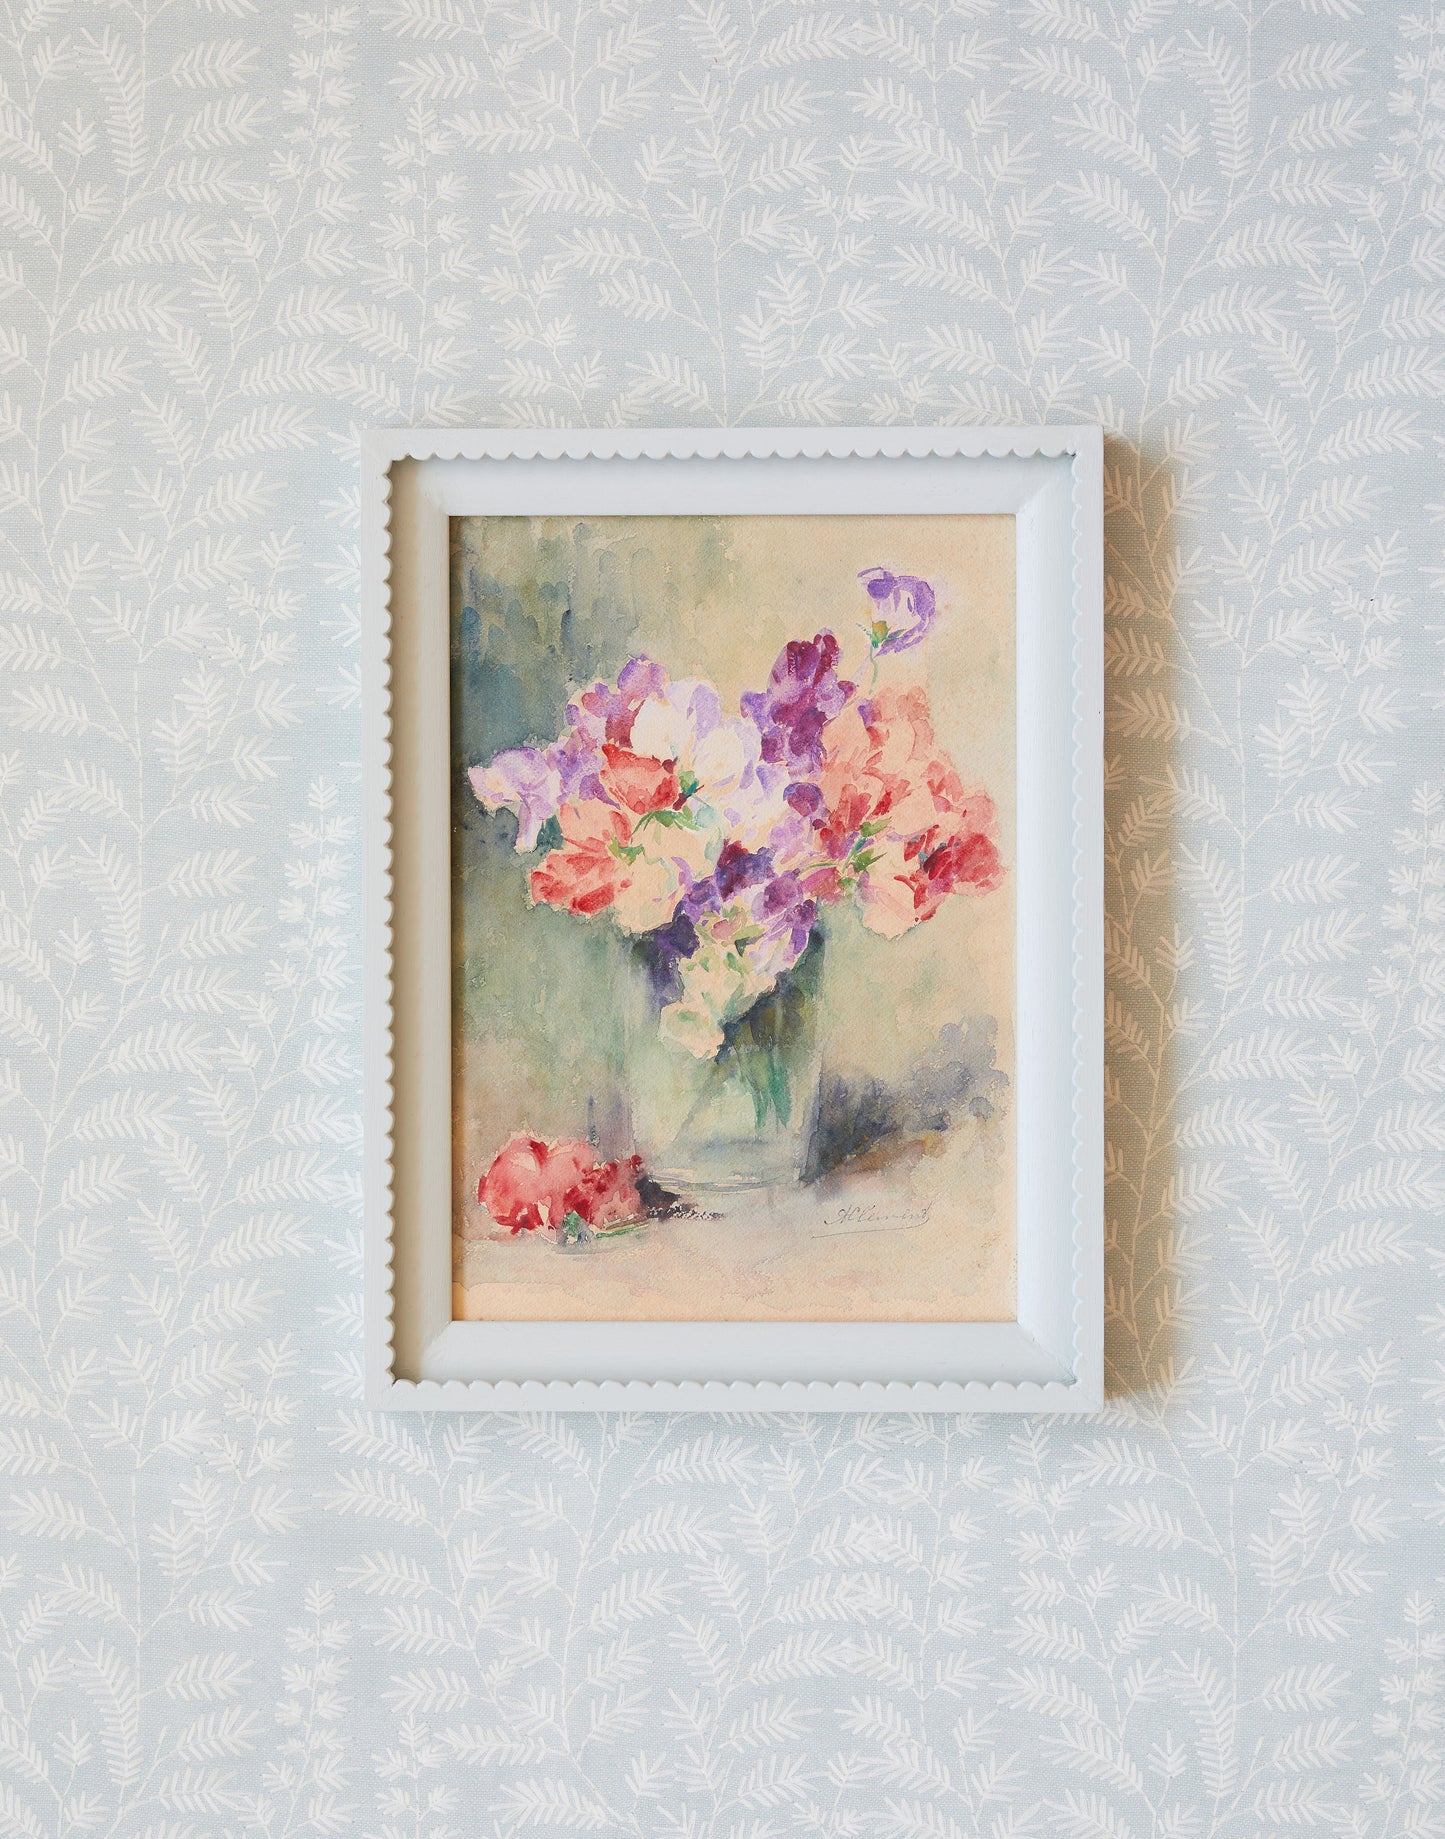 A 20th Century Watercolour of Sweet Peas in a Glass Vase